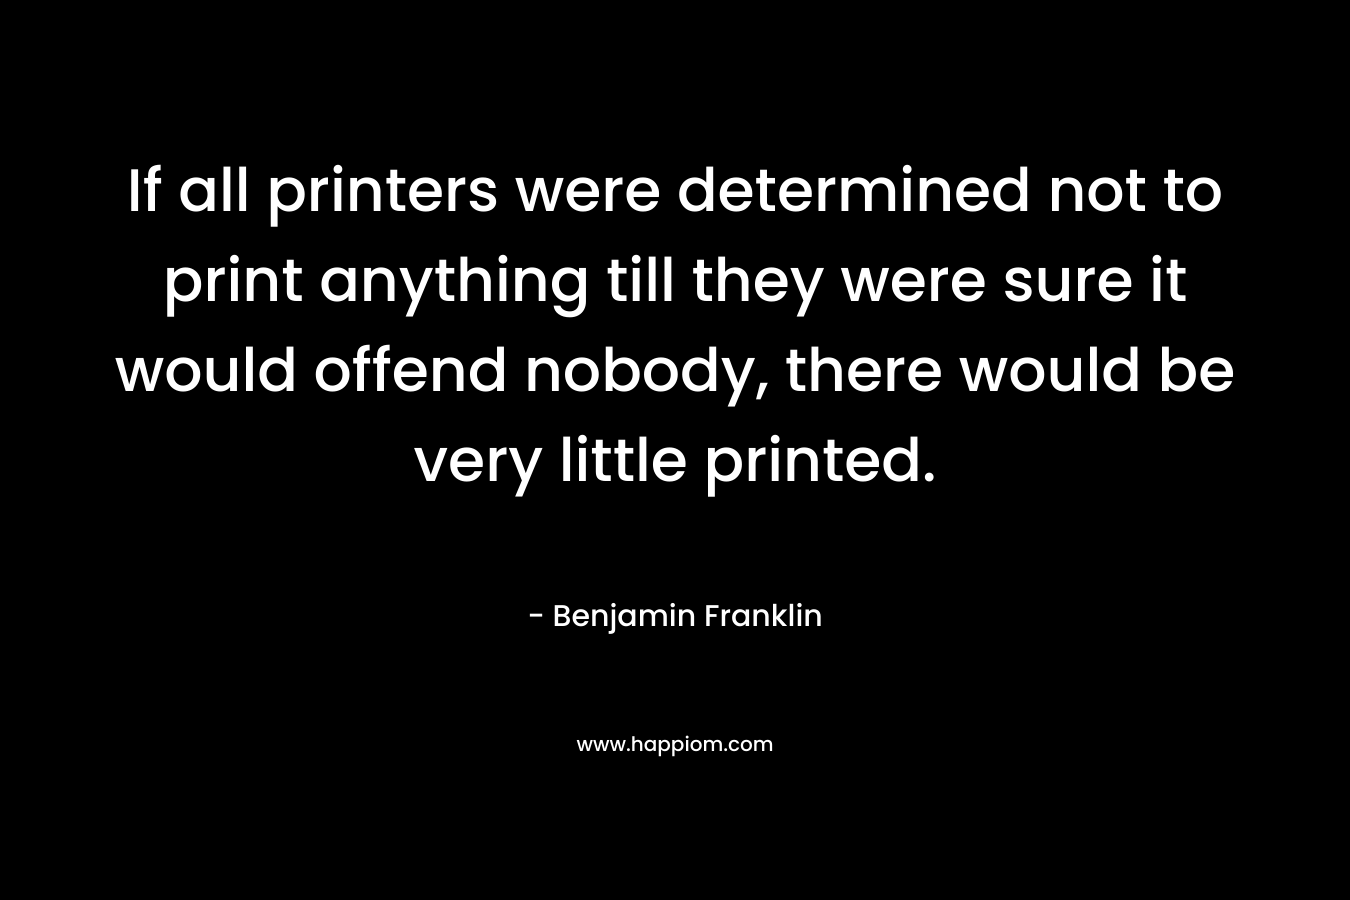 If all printers were determined not to print anything till they were sure it would offend nobody, there would be very little printed.